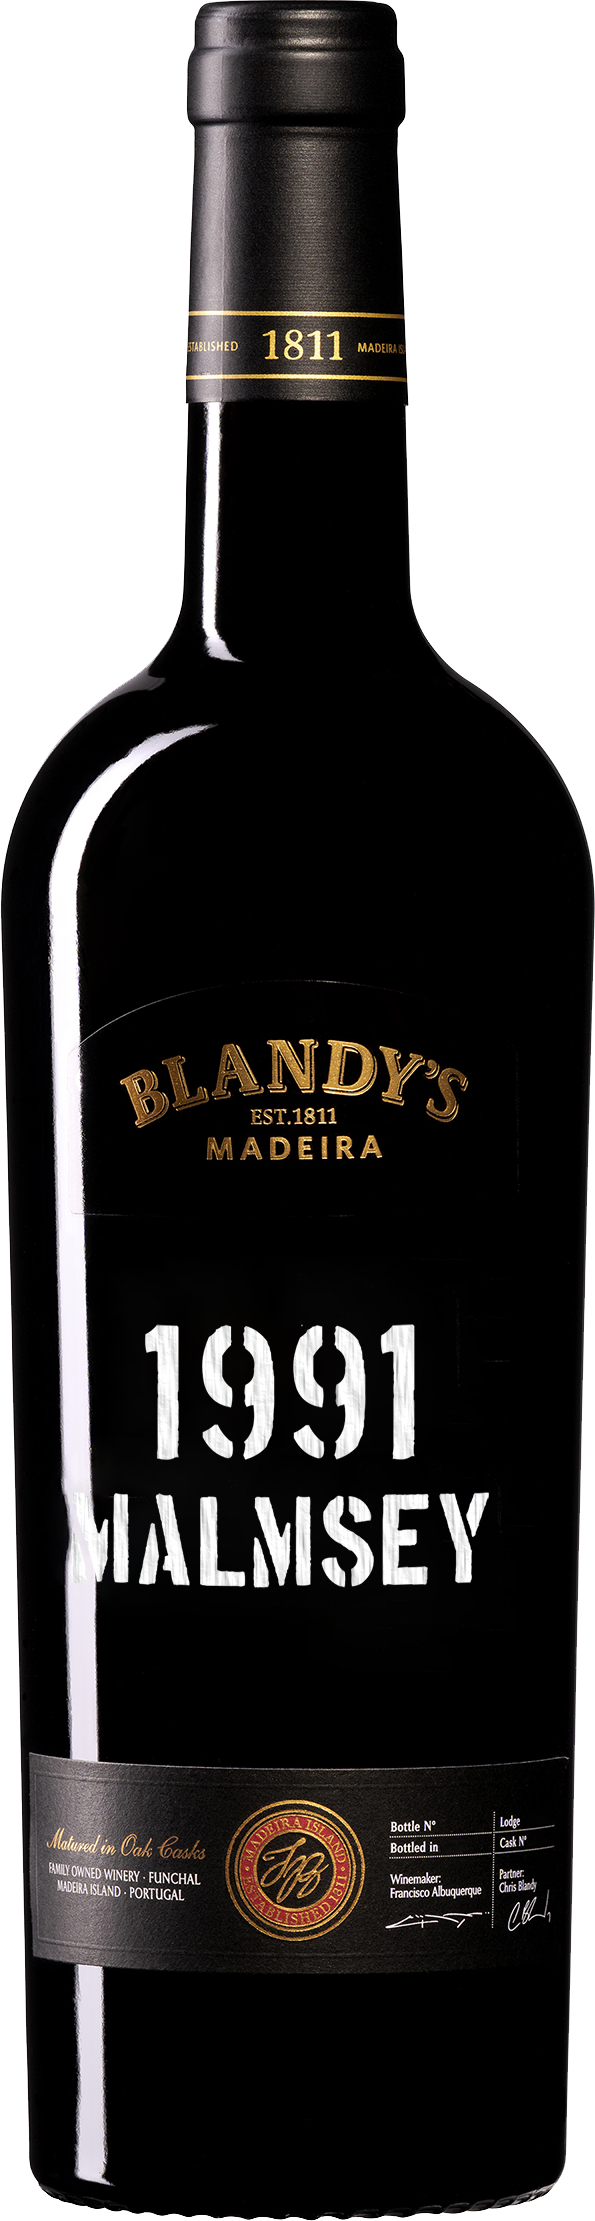 Product Image for BLANDY'S VINTAGE MALMSEY1991 - MAGNUM (1.5L)